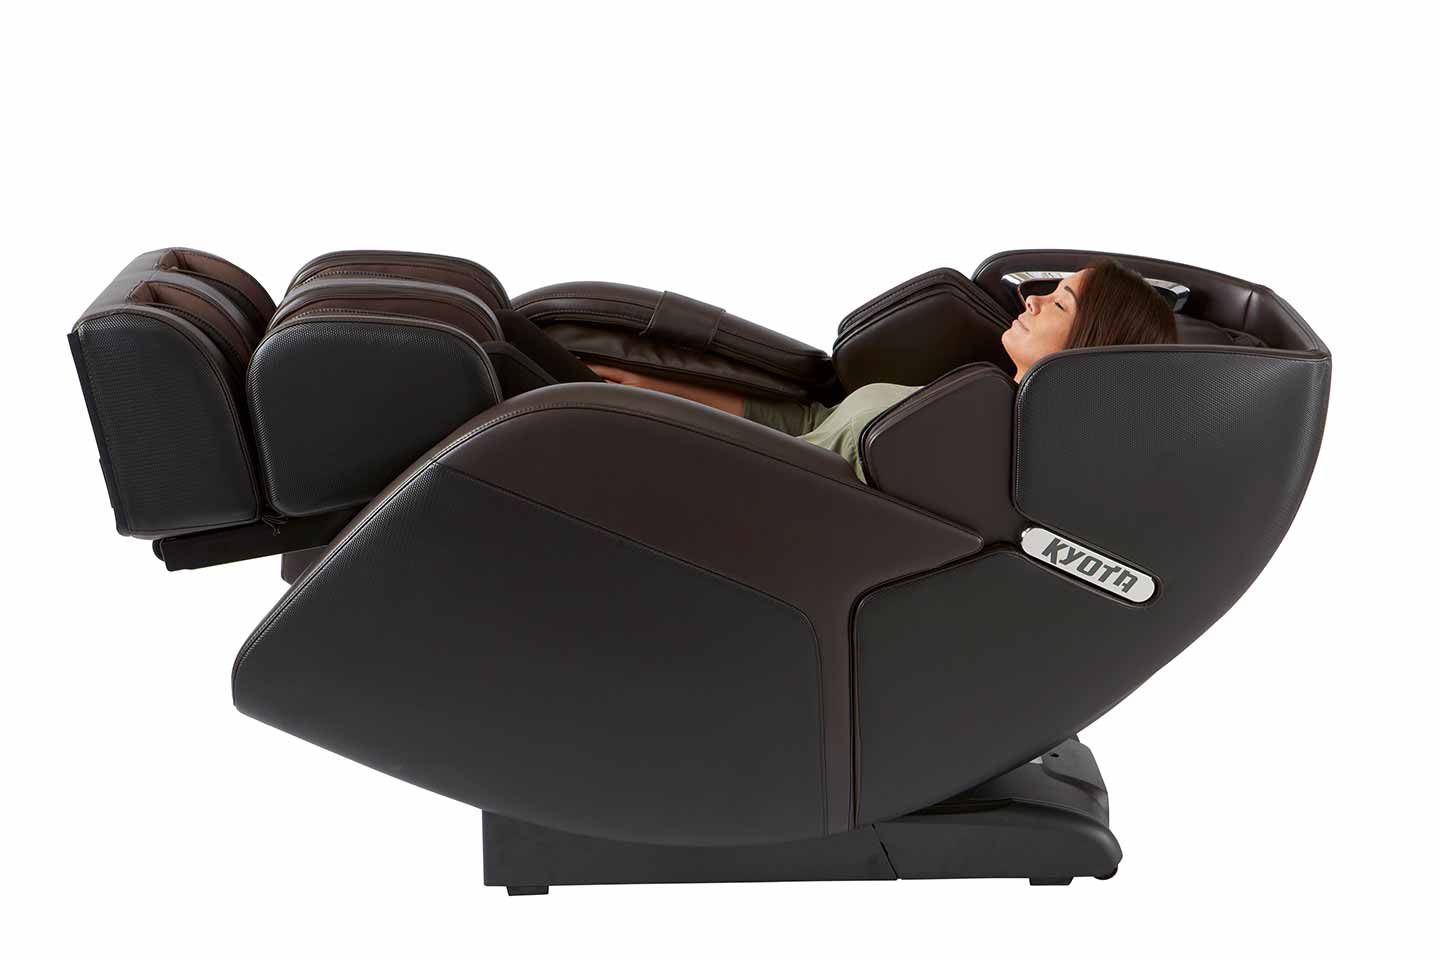 Purchase the best-quality electrical massage chairs from the top website